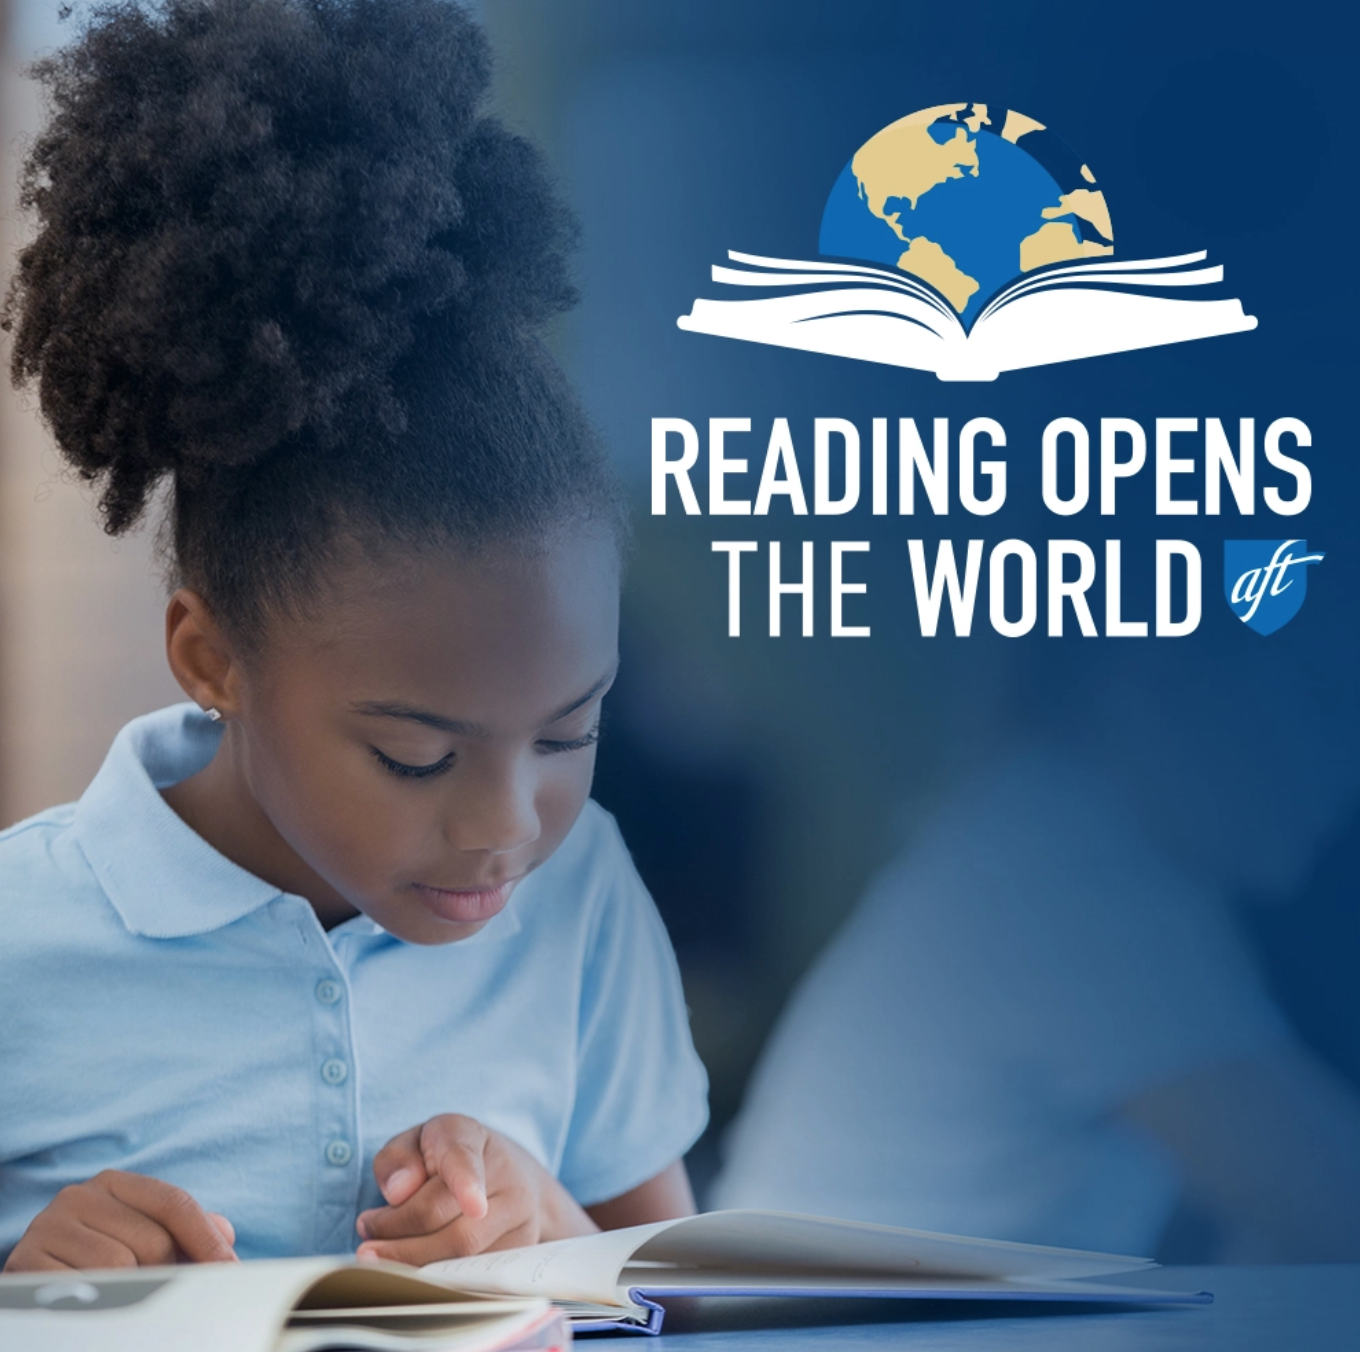 Reading is a foundational skill necessary for virtually everything we do. It opens possibilities for all children to succeed—to learn and 